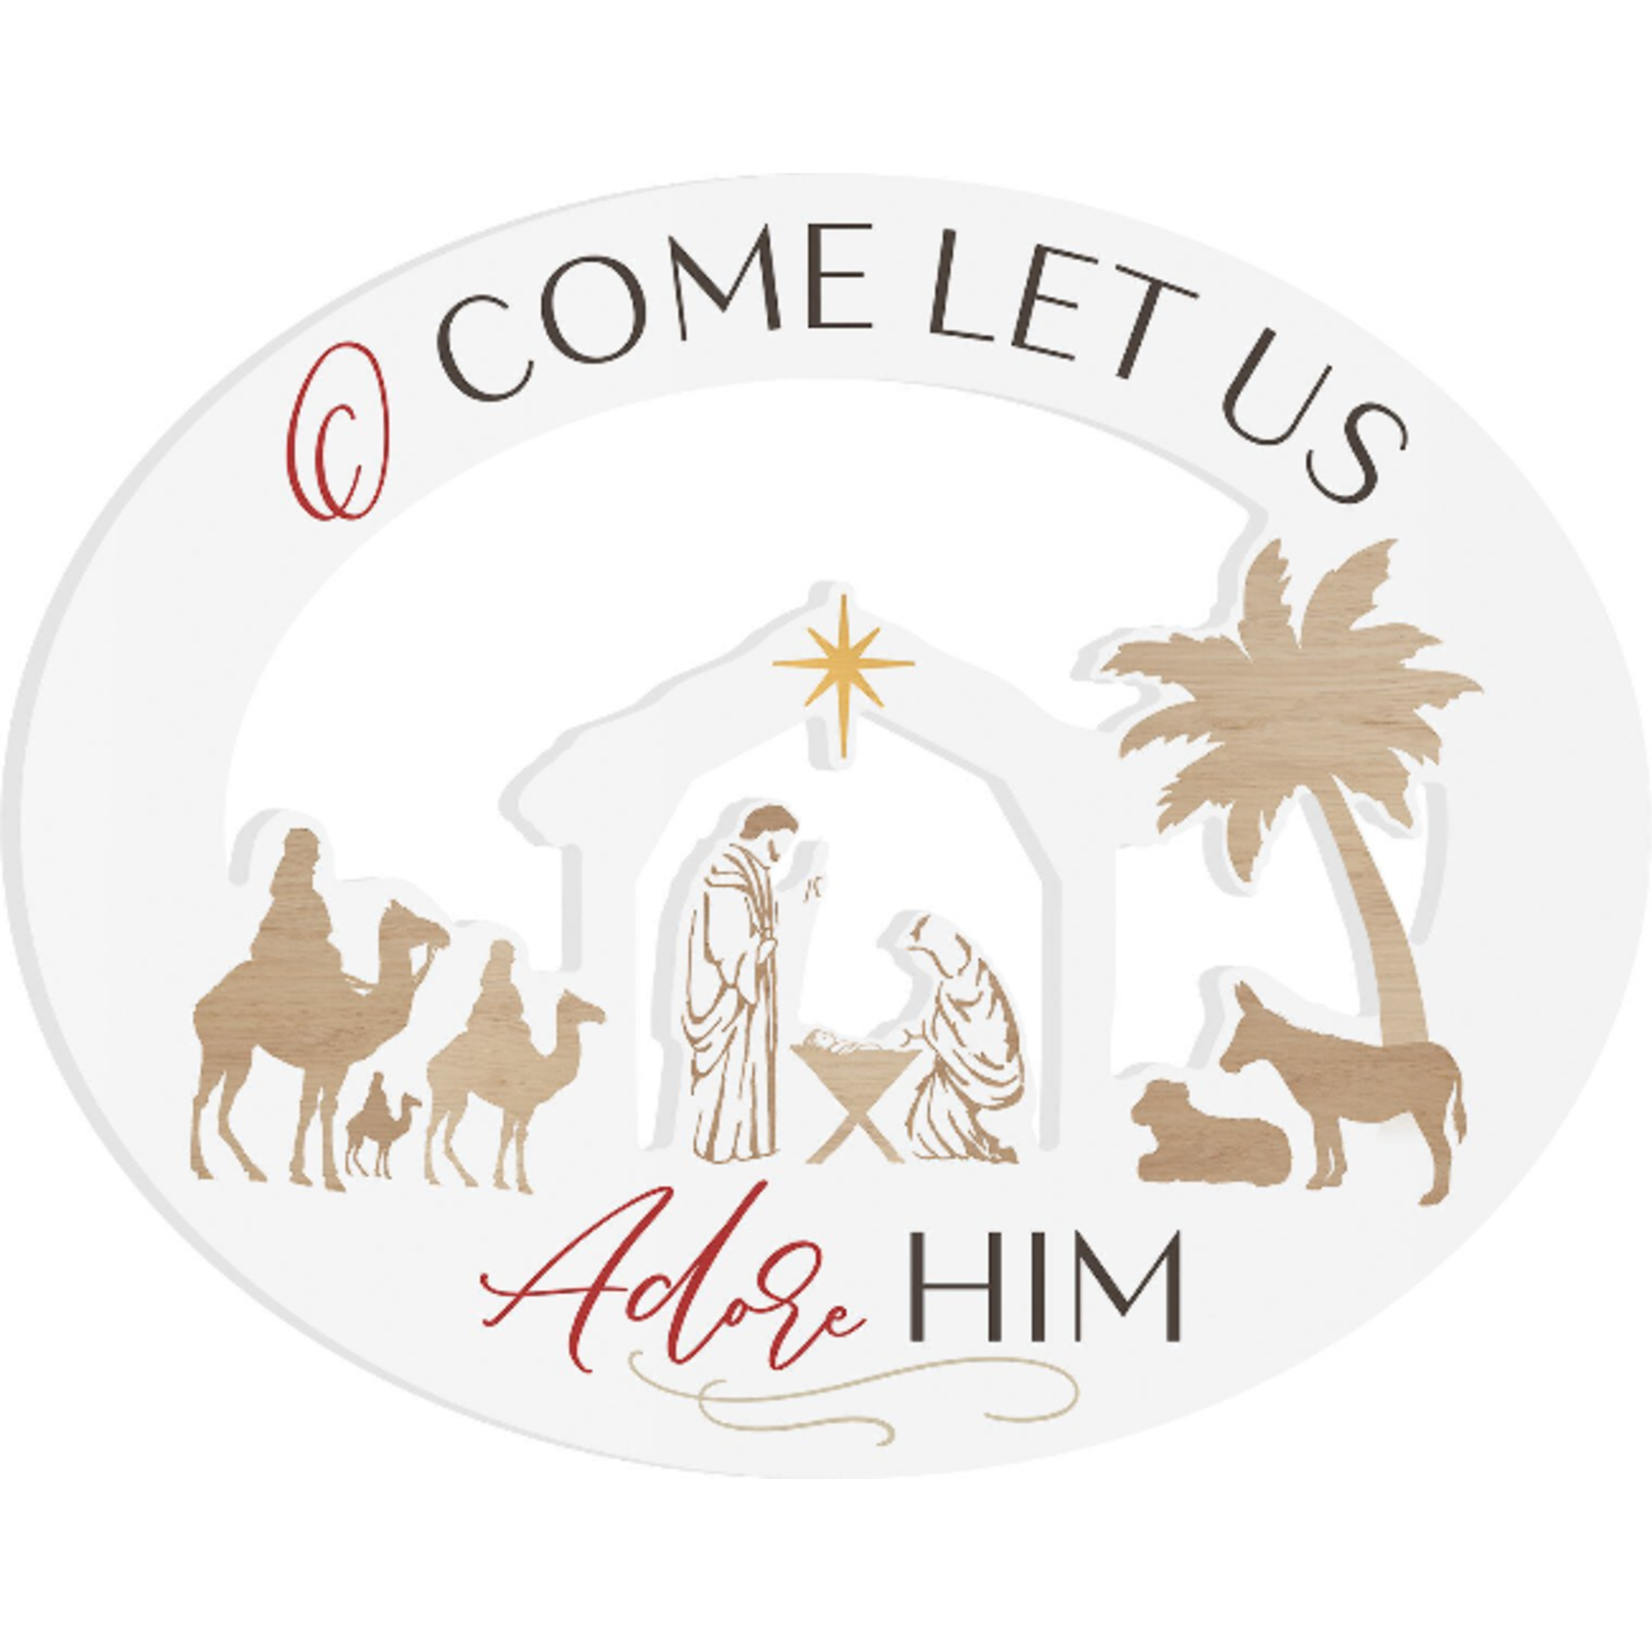 Let us adore him nativity oval sign